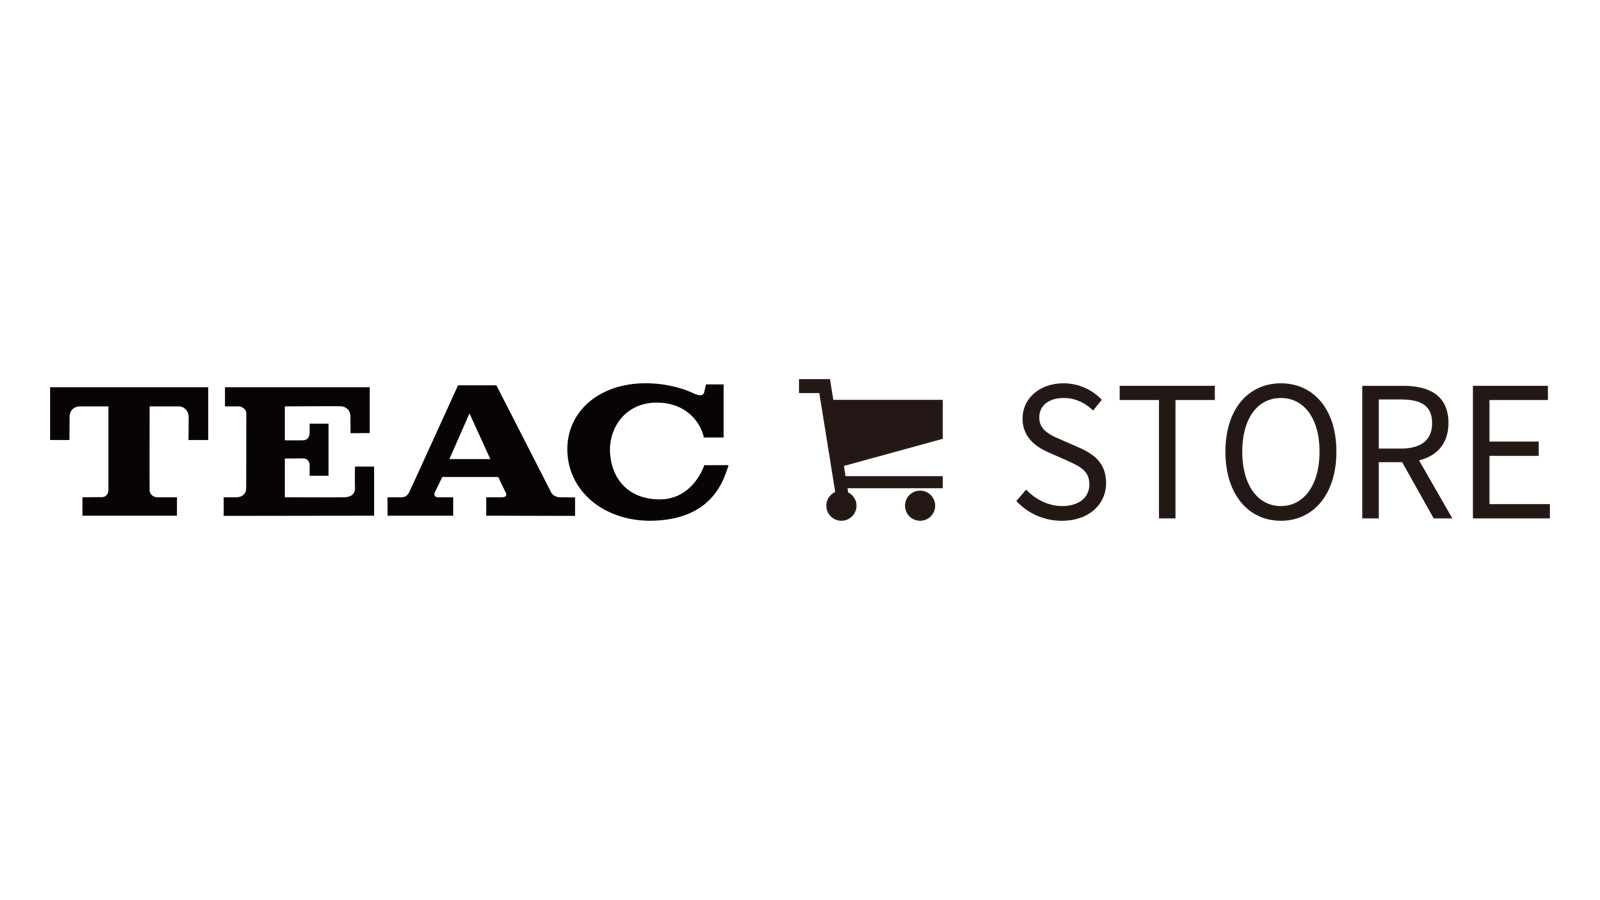 TEAC STORE (ティアックストア)